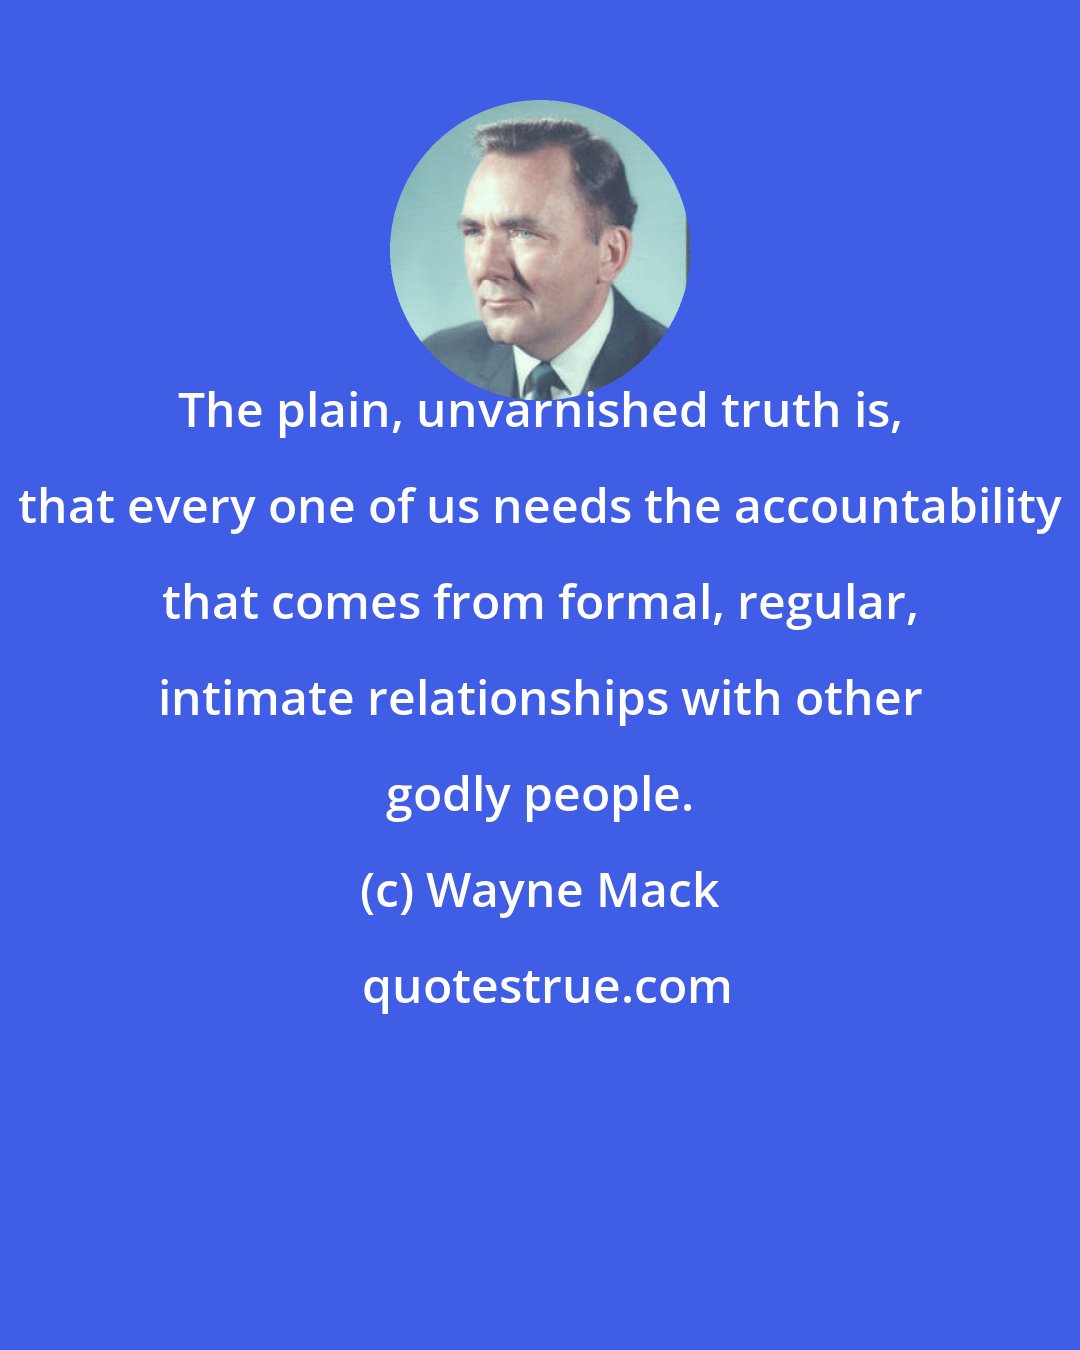 Wayne Mack: The plain, unvarnished truth is, that every one of us needs the accountability that comes from formal, regular, intimate relationships with other godly people.